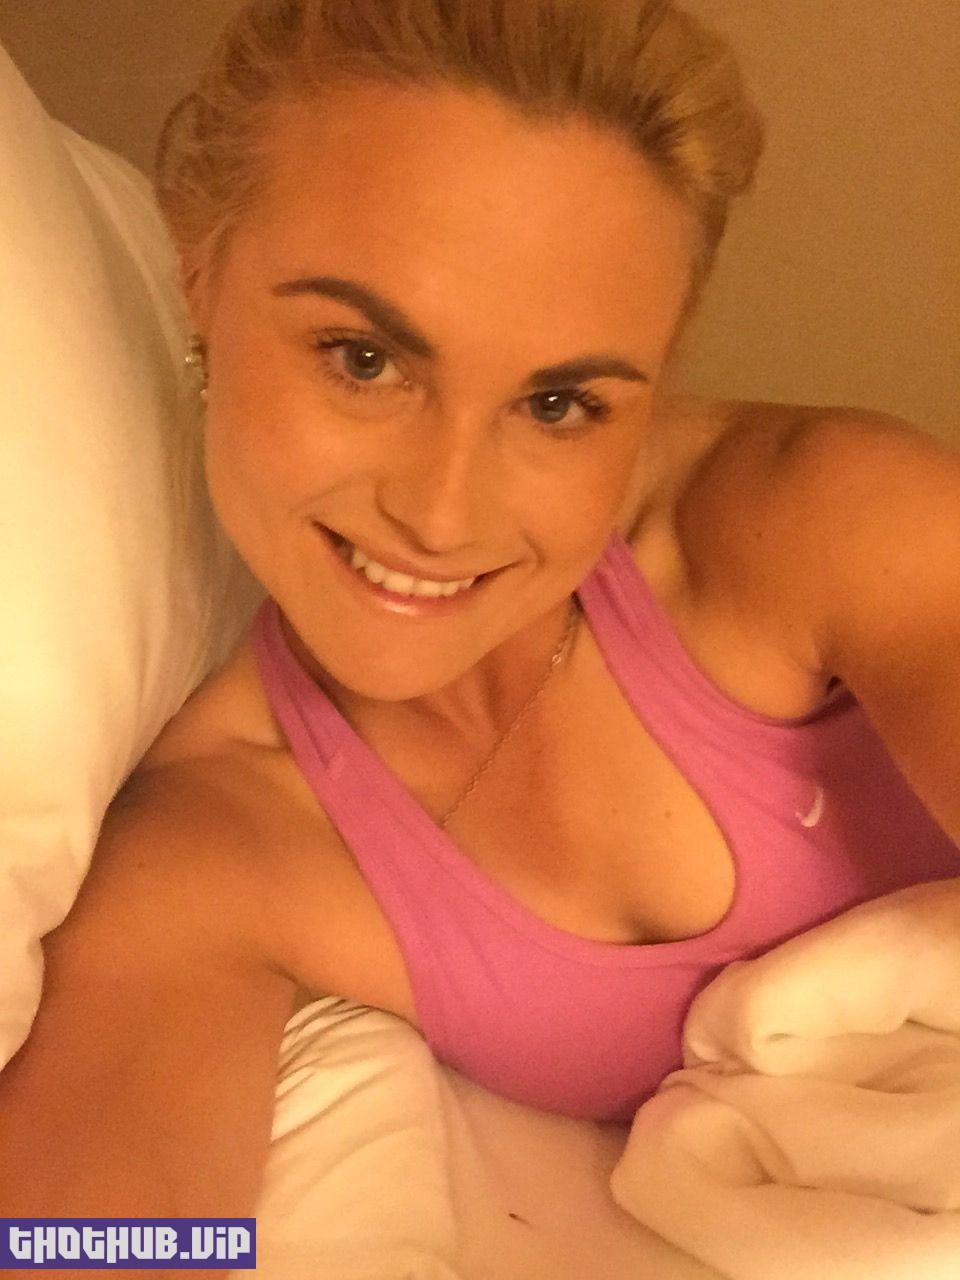 Carly Booth nude photos leaked The Fappening 2017